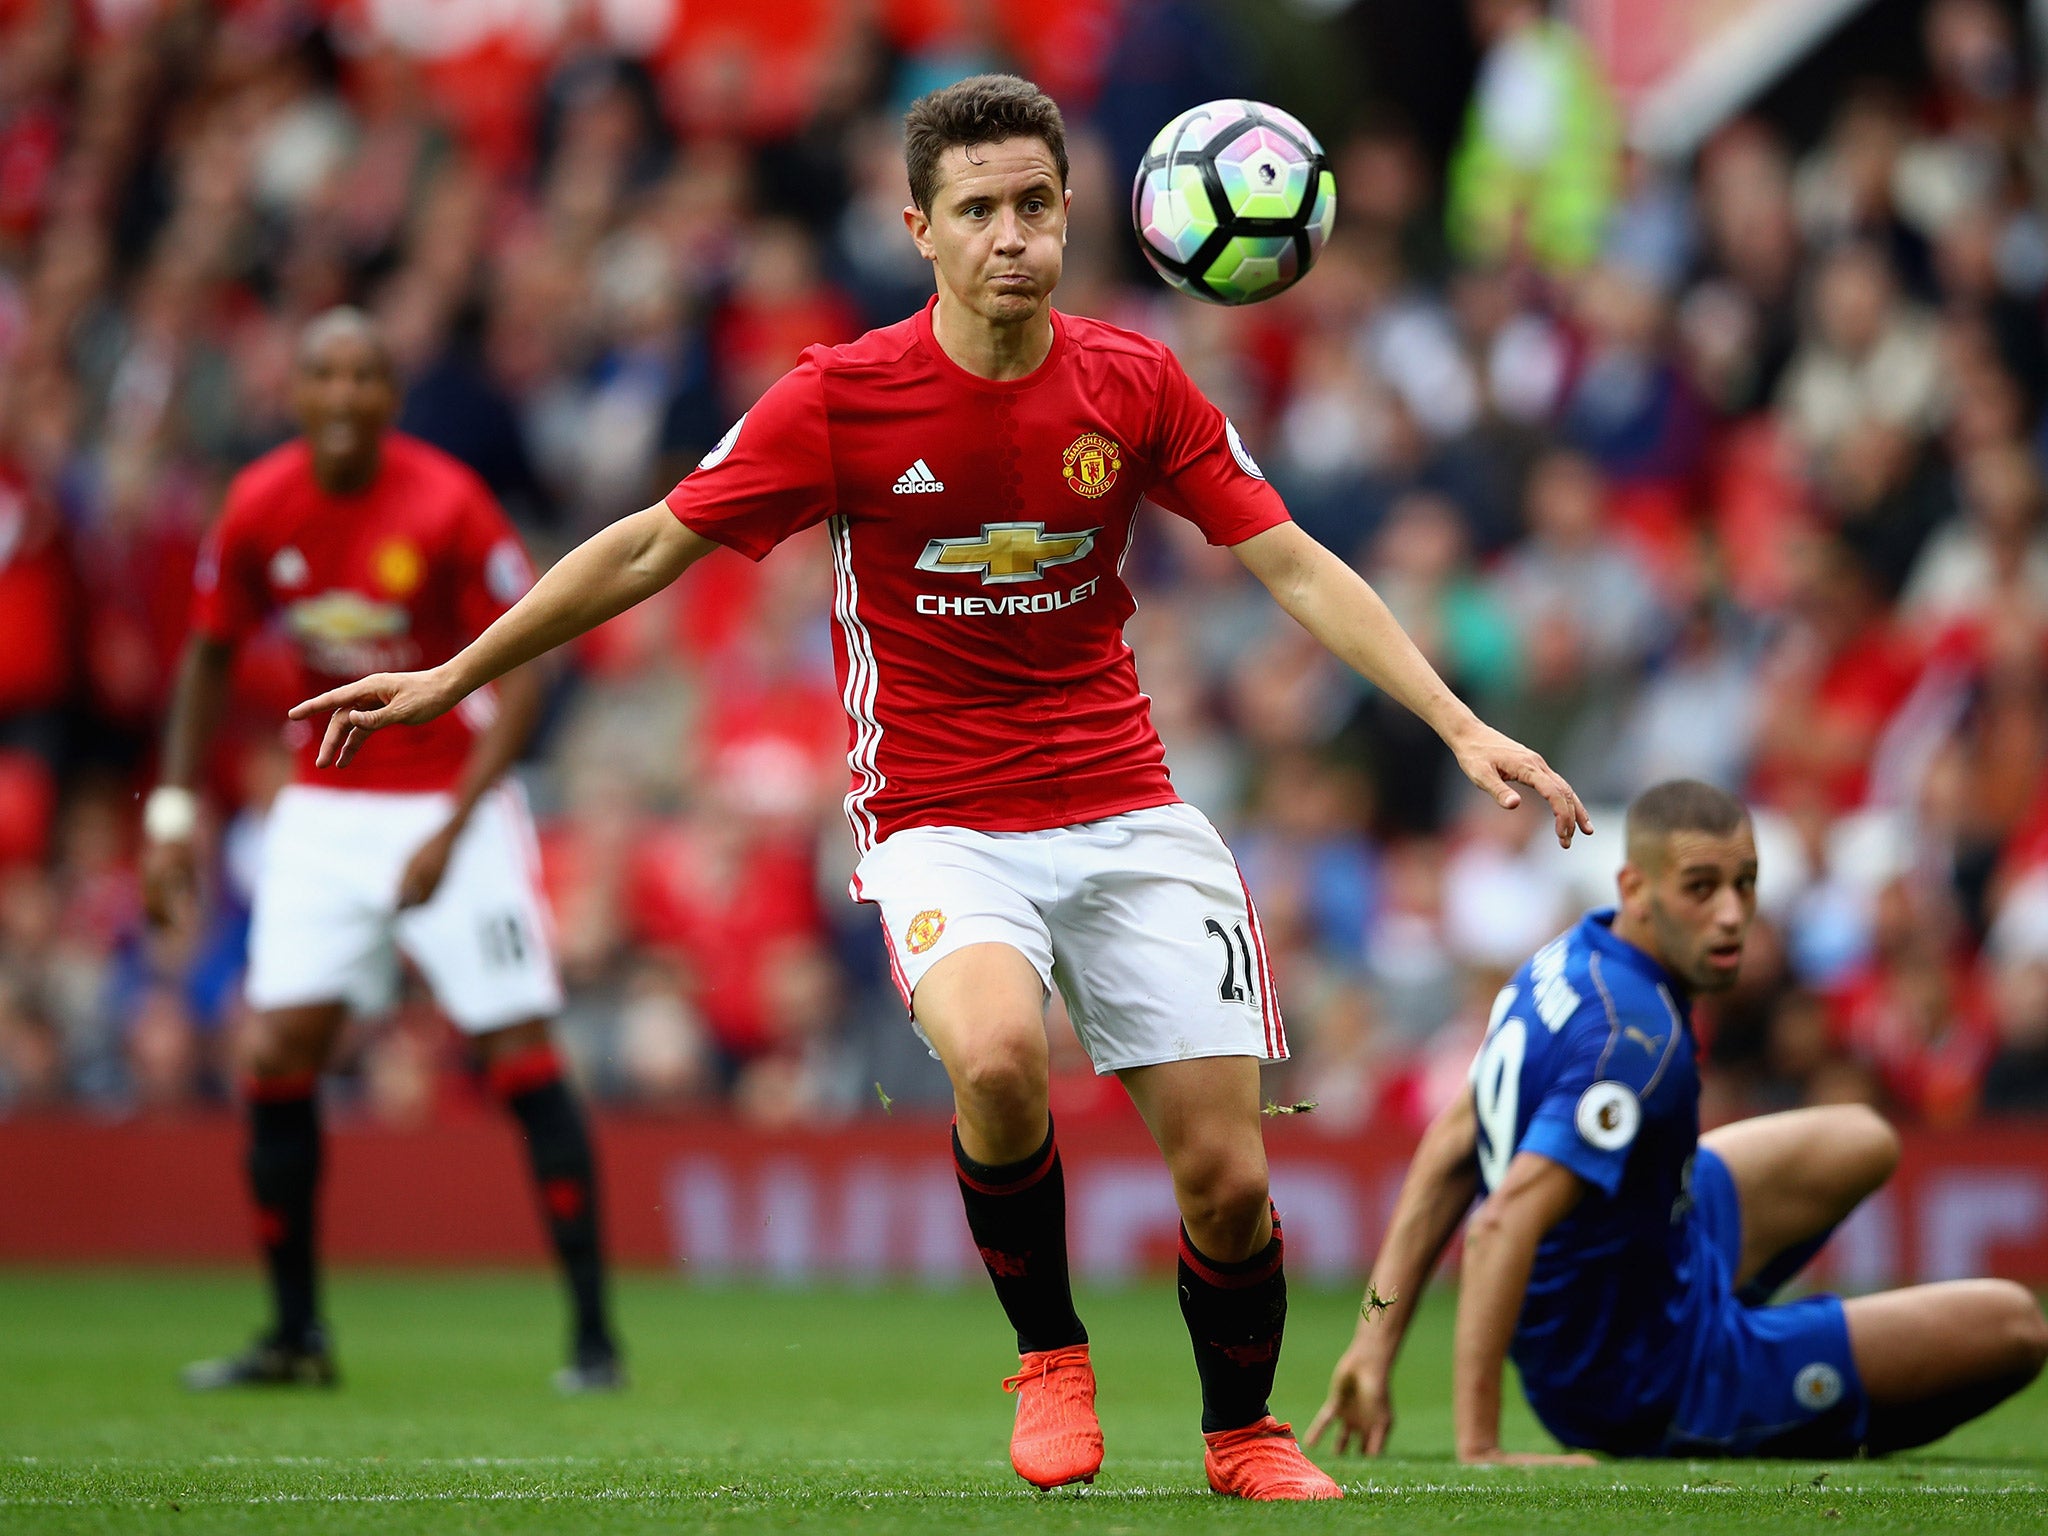 Ander Herrera could stake his claim for a regular place in Manchester United's first team against Zorya